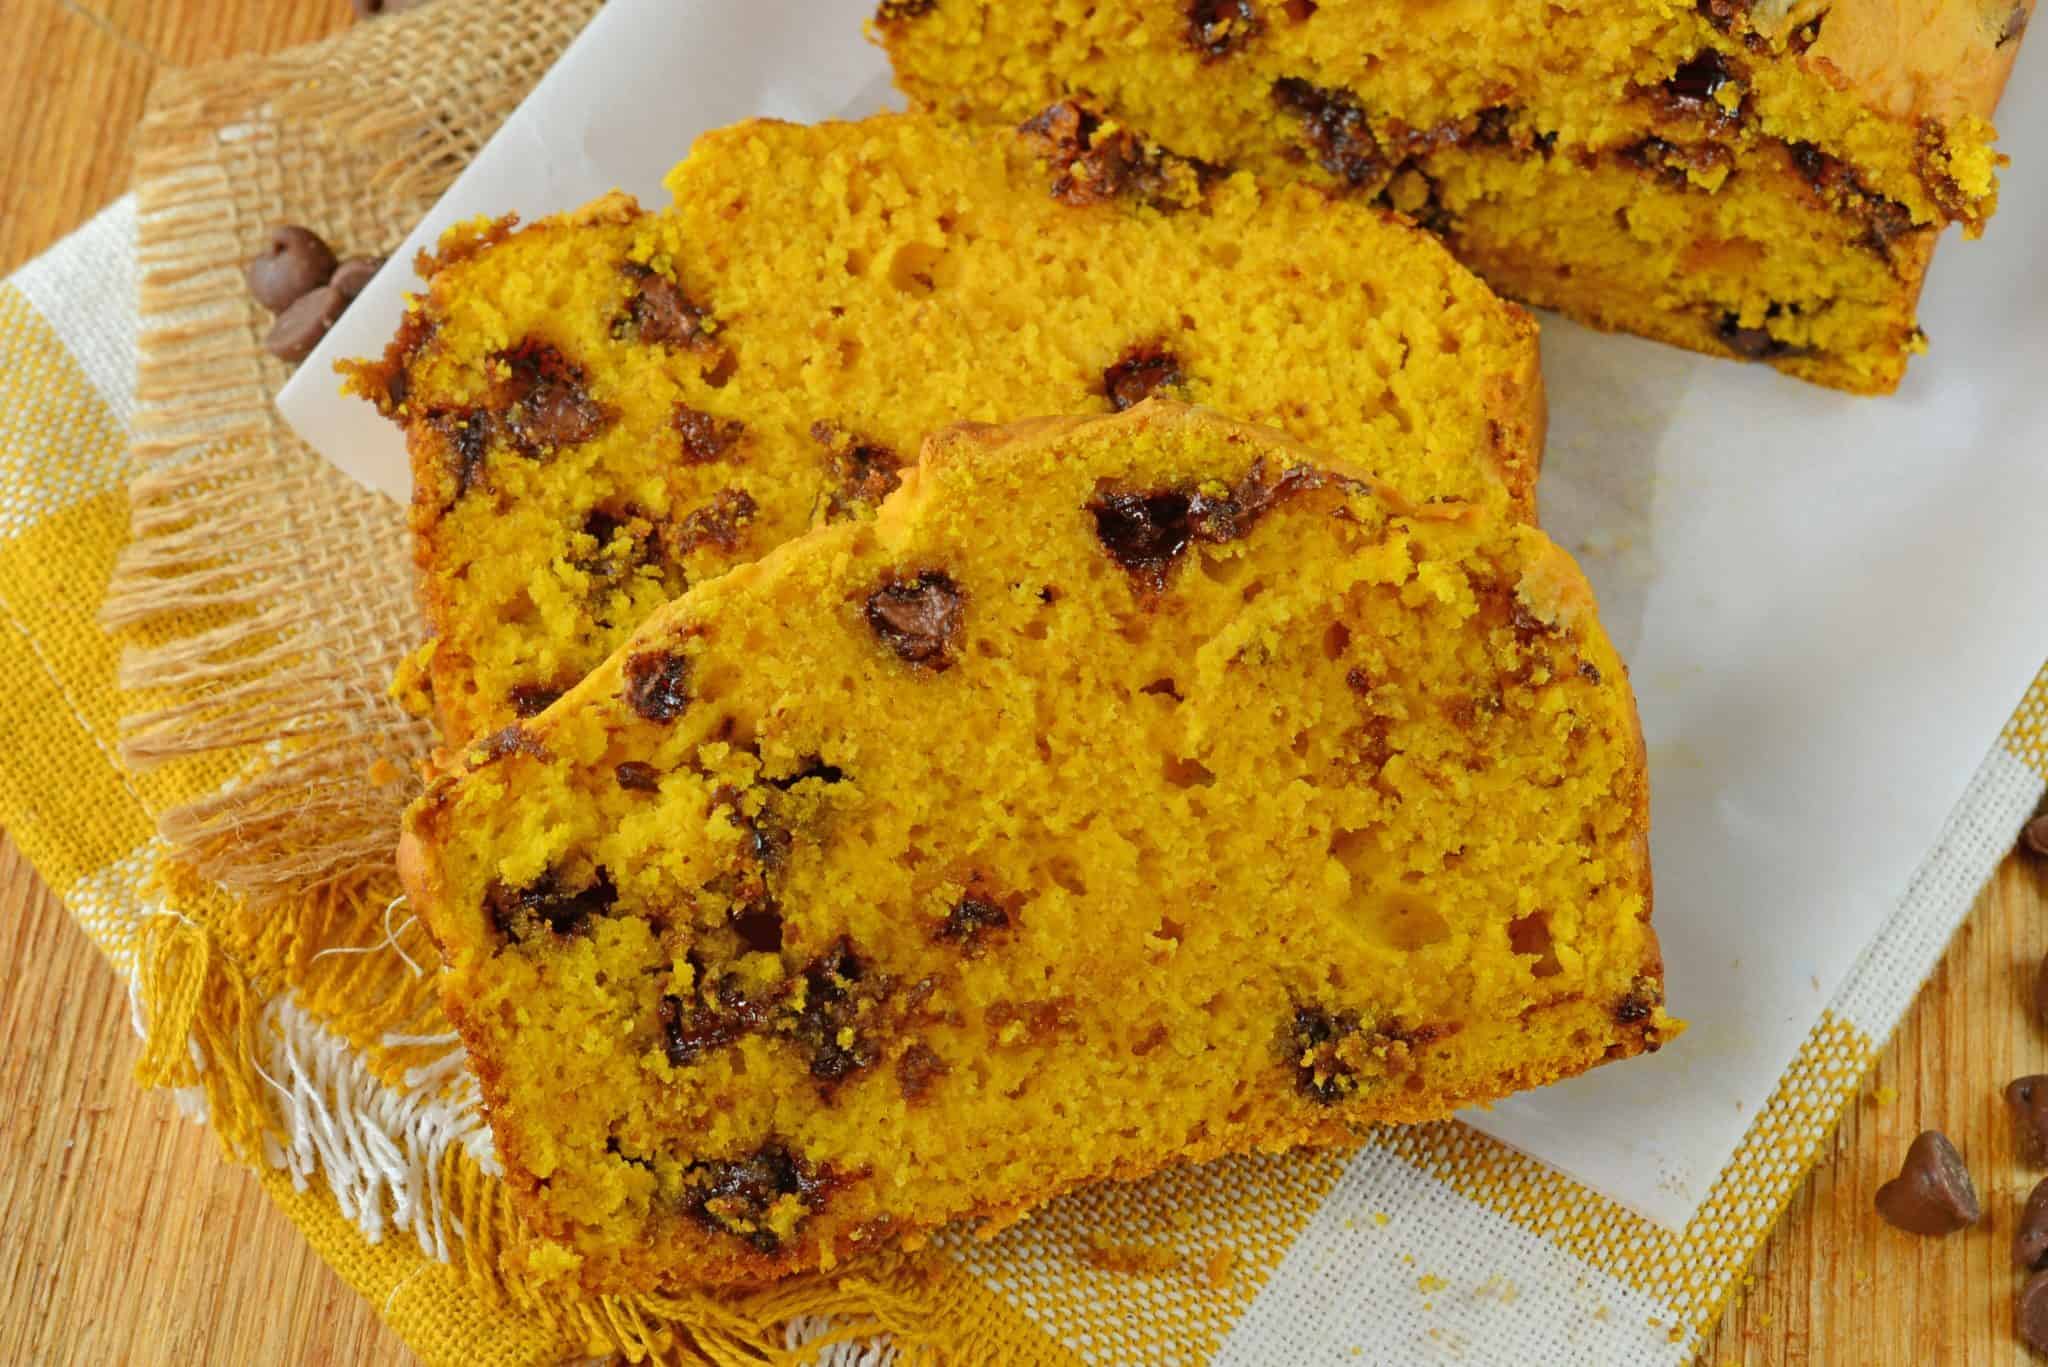 Chocolate Chip Pumpkin Bread is easy to make, soft and flavorful. A perfect loaf for breakfast or dessert!